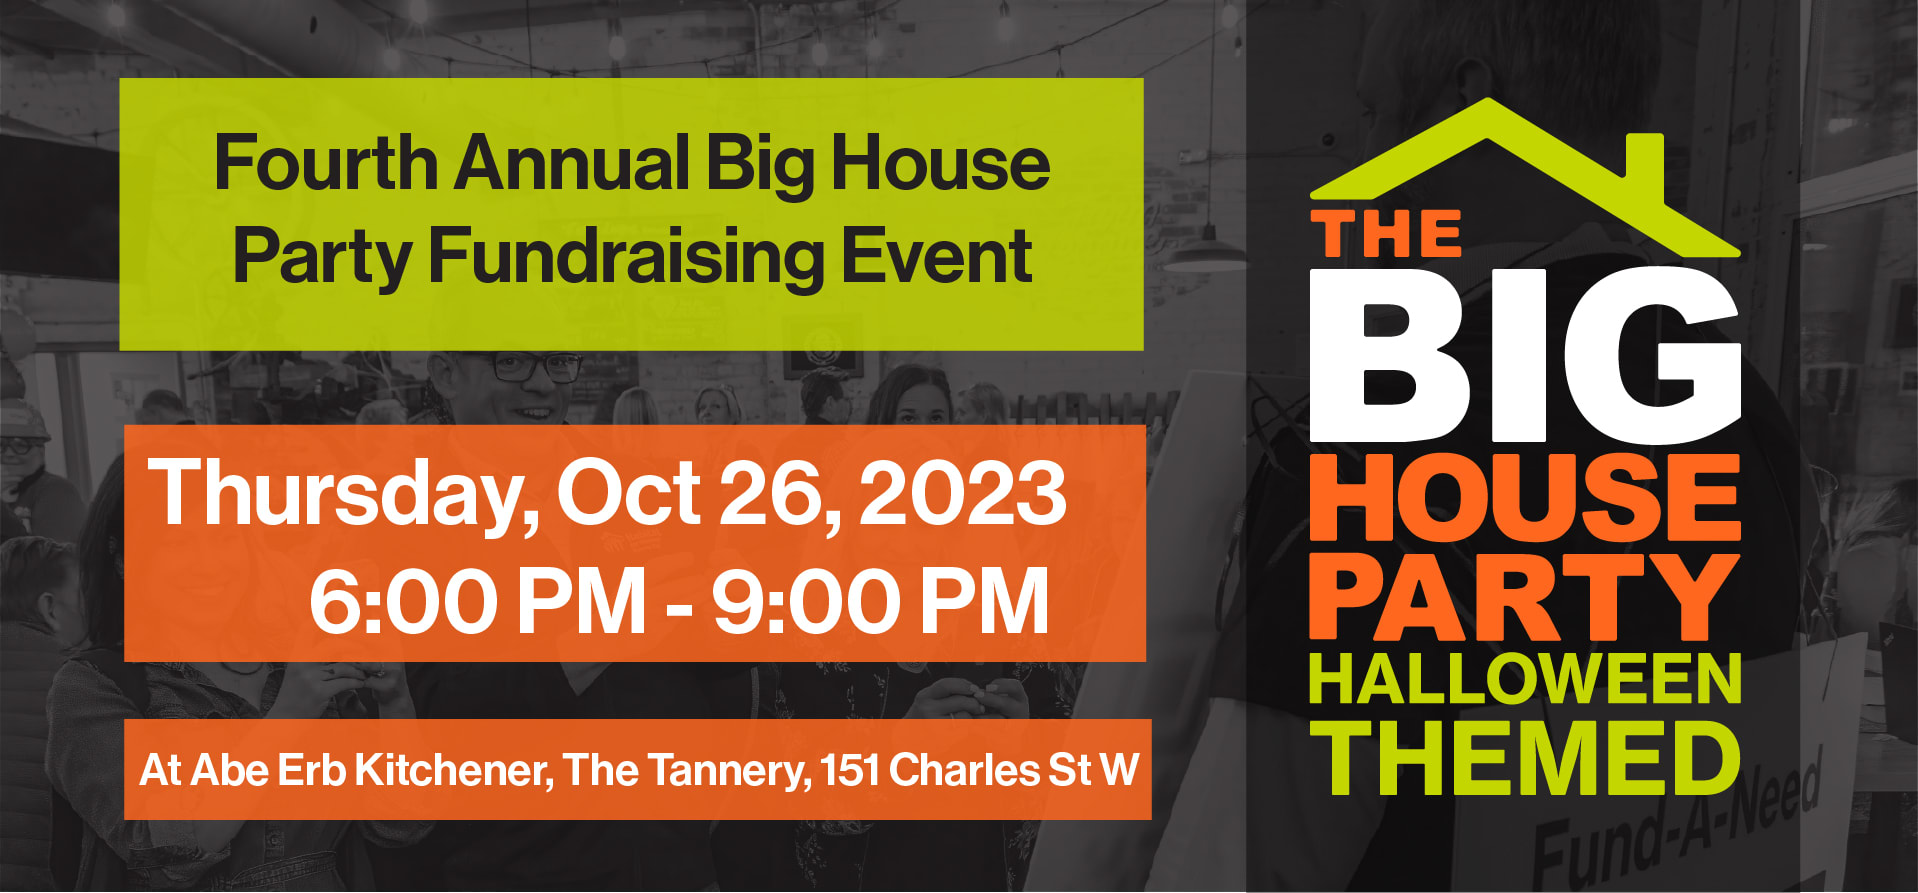 Big House Party Halloween Themed: Third Annual Big House Party Fundraising Event. October 27, 2022 6-9 PM. At Farm League Brewing. $50 Per Ticket